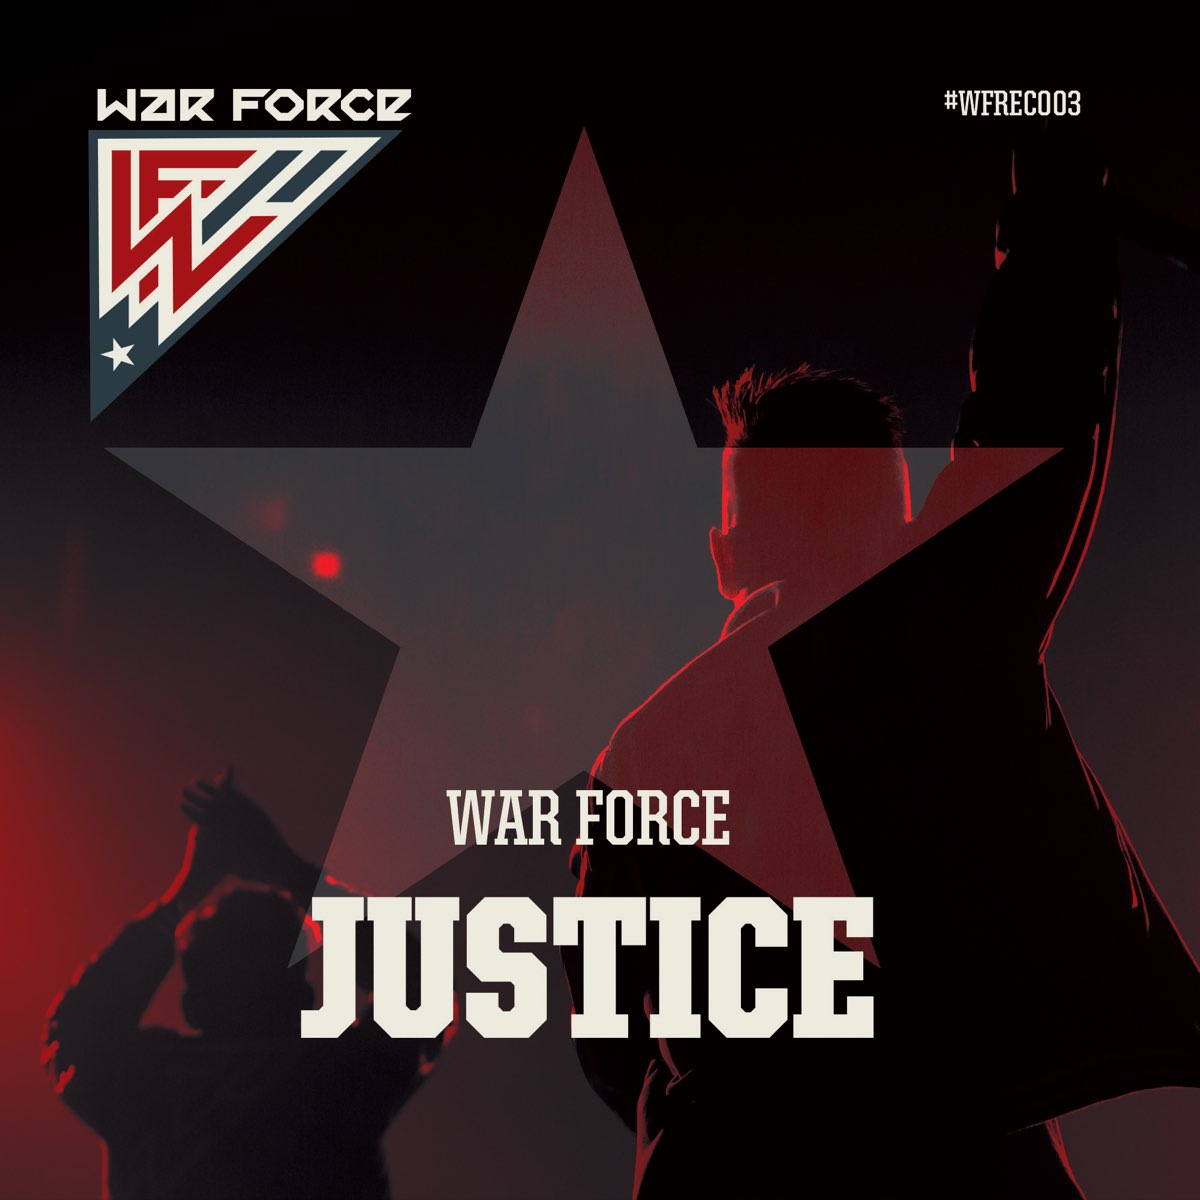 Forced justice